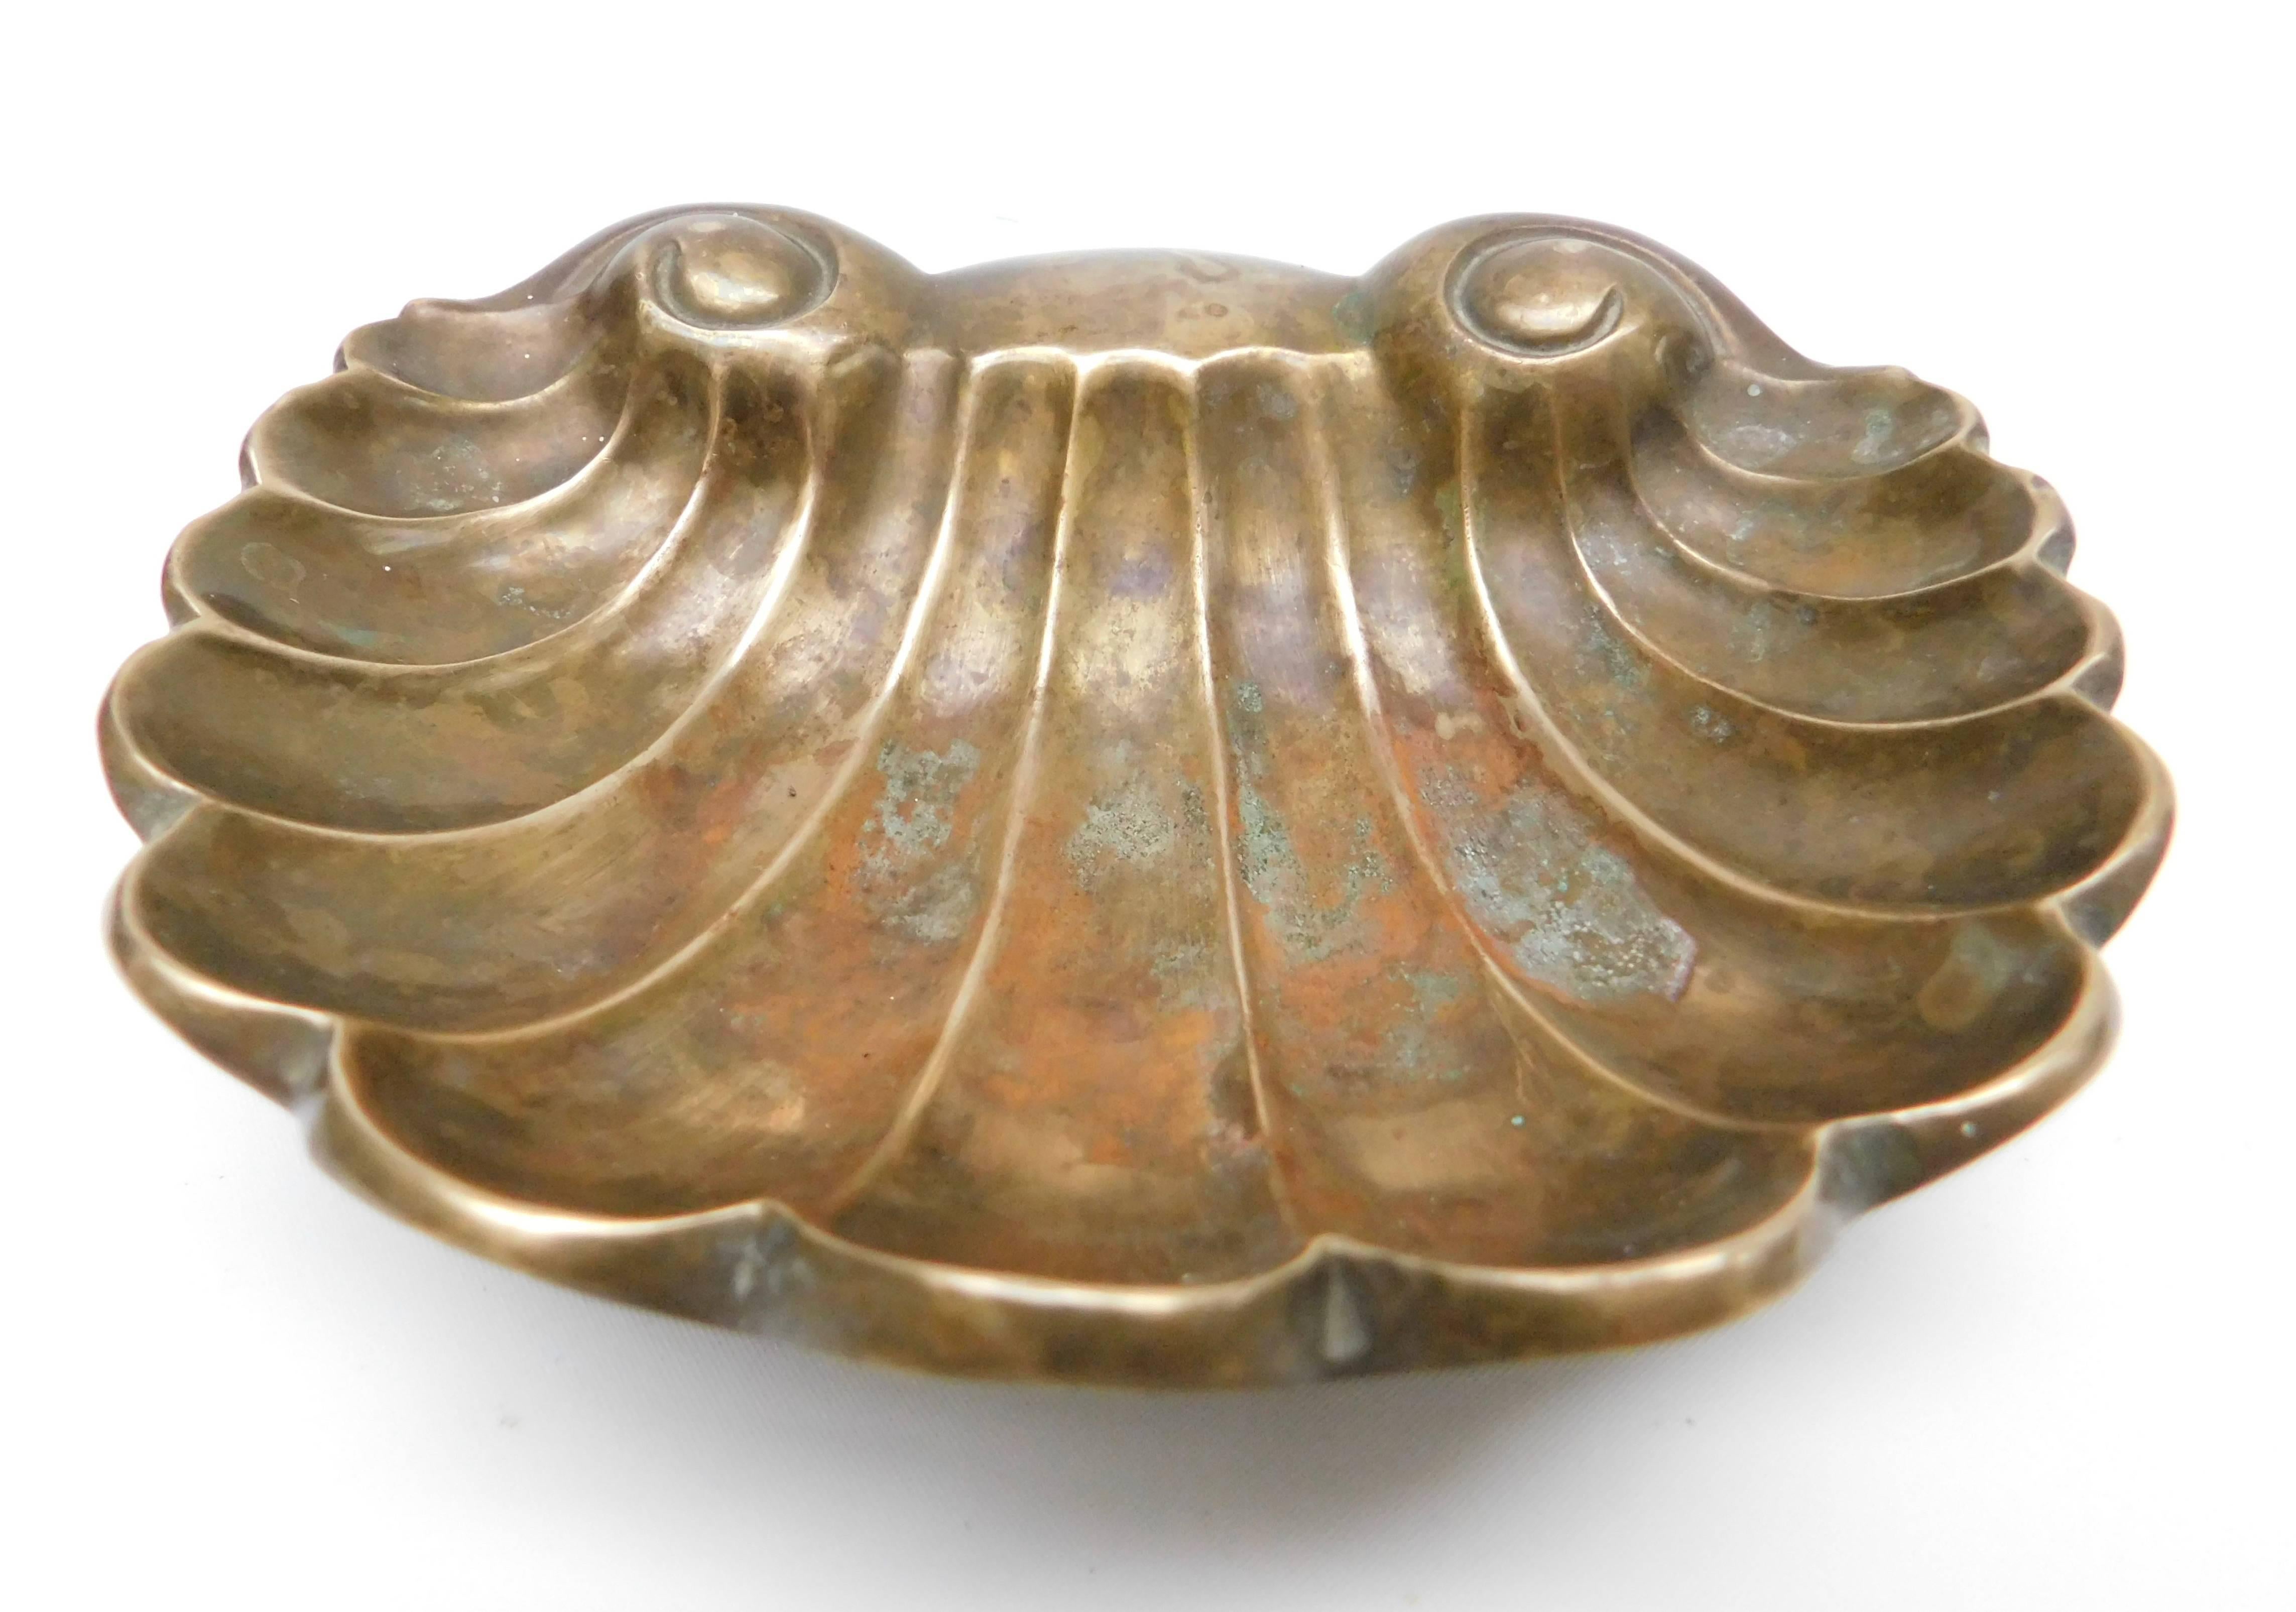 19th century Continental cast bronze dish in a shell shaped form. Cast in solid bronze with an exceptionally lovely red and green patina achieved from over 100 years of use holding soaps and sponges next to the bath. The dish is made with one back